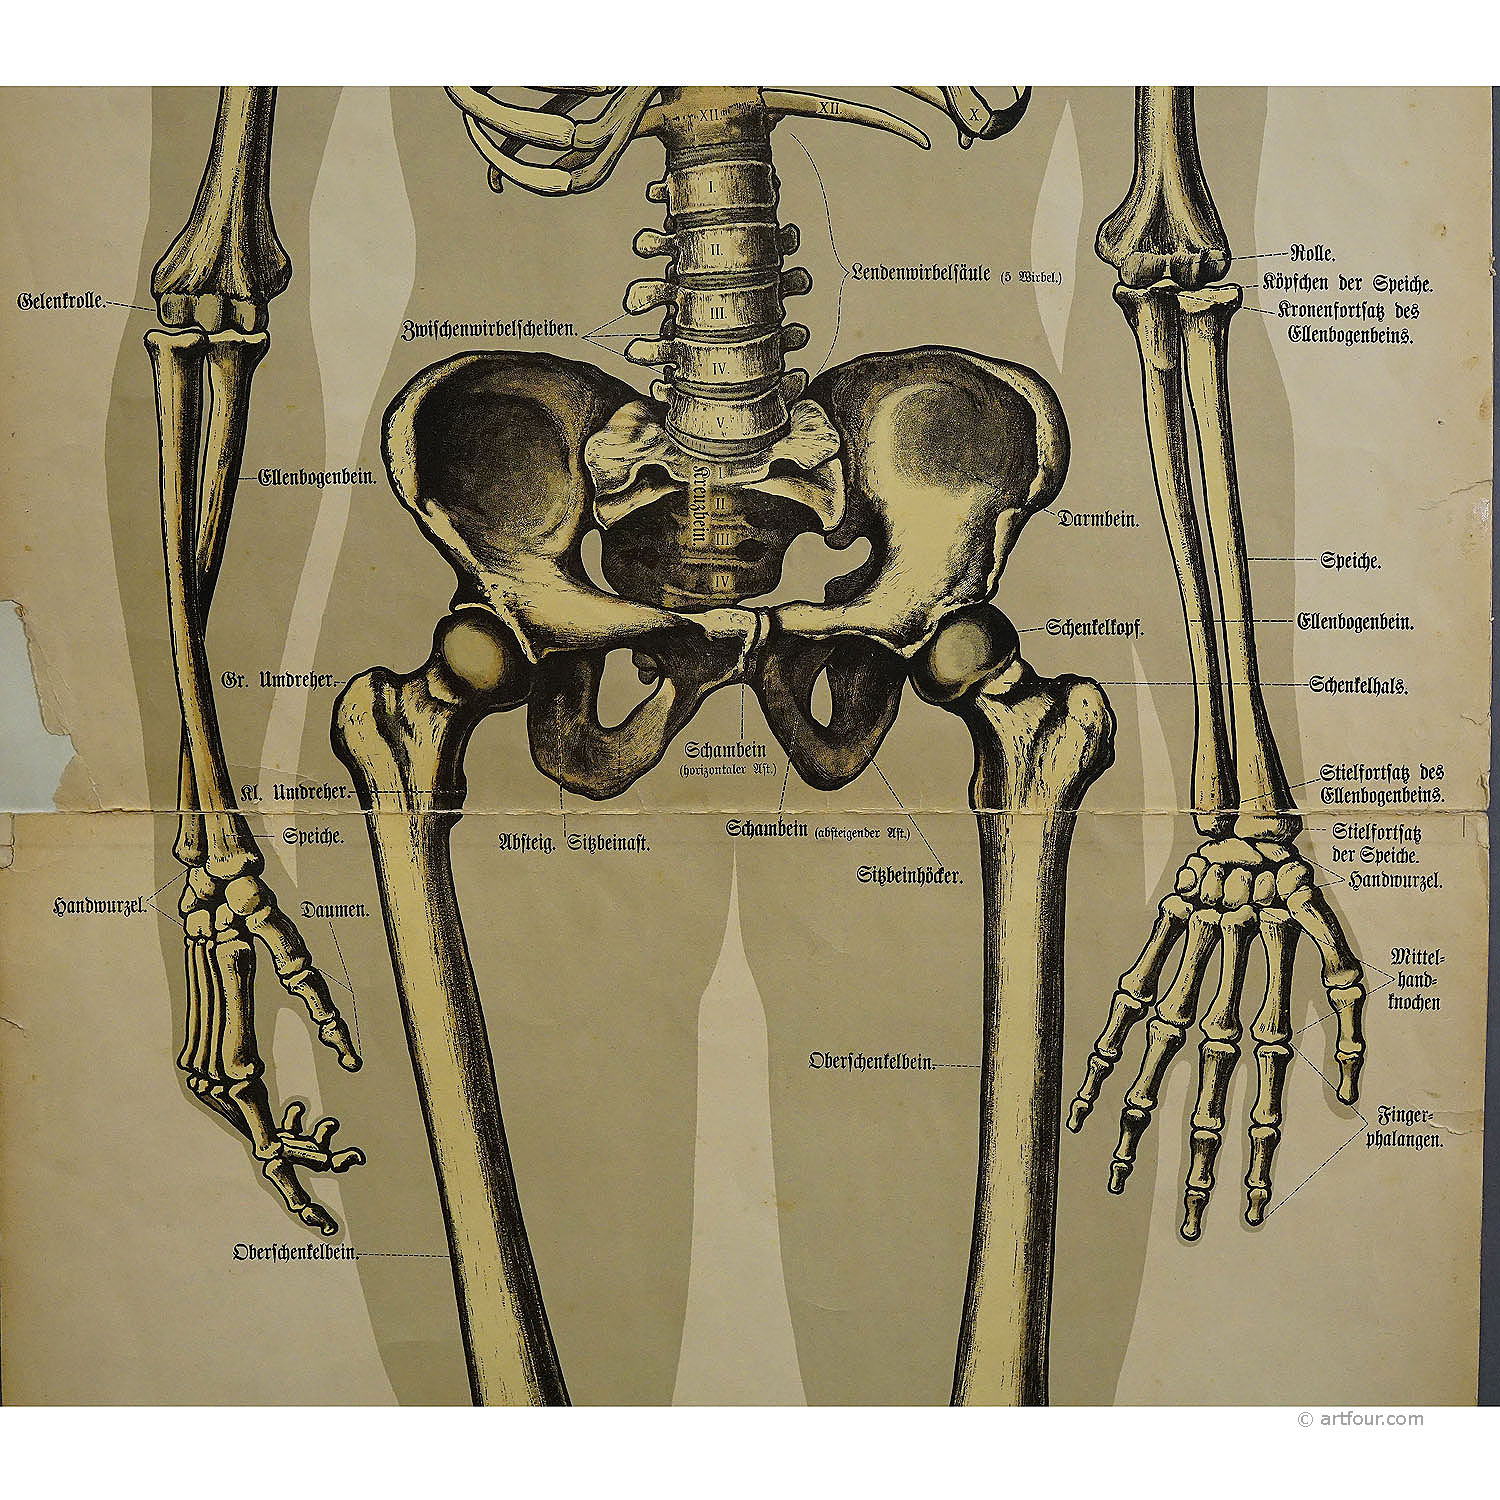 Antique Anatomical Wall Chart Depicting the Human Skeleton